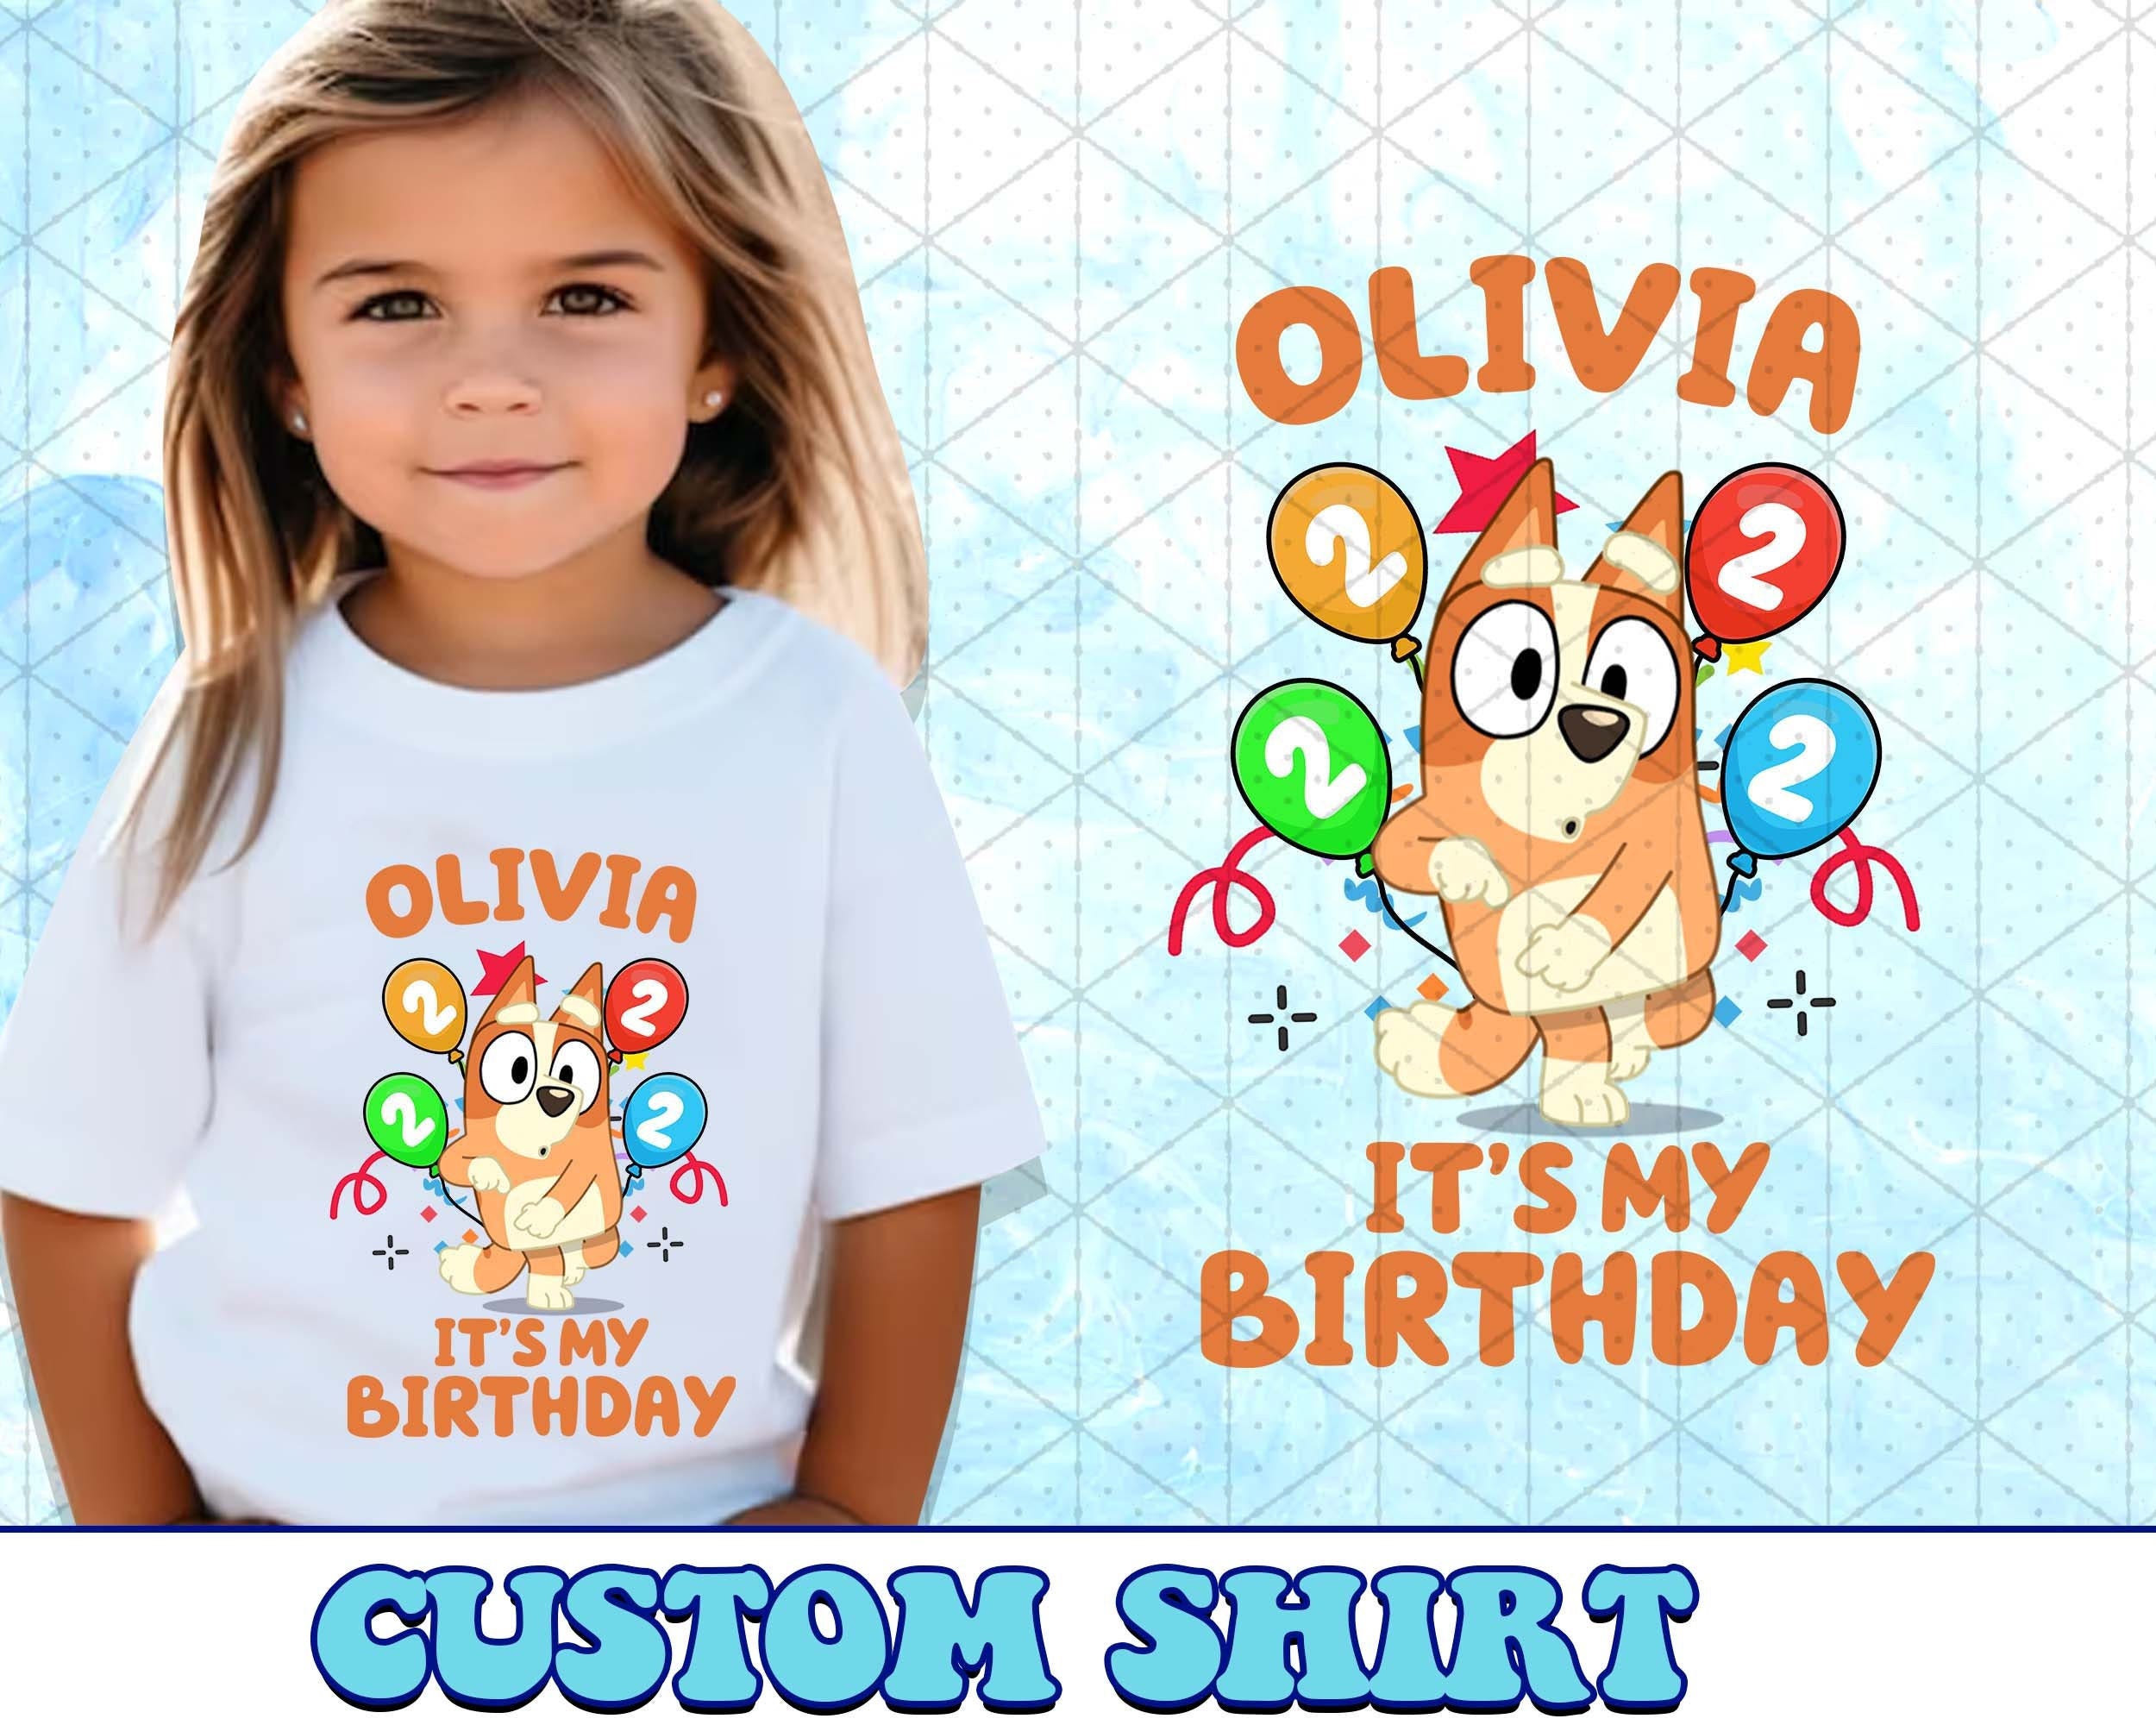 Customized Bluey PNG, Bluey Family Birthday PNG, Bluey Birthday Png, Bluey Bingo Png, Bluey Mom Png, Bluey Dad Png, Bluey Friends Png